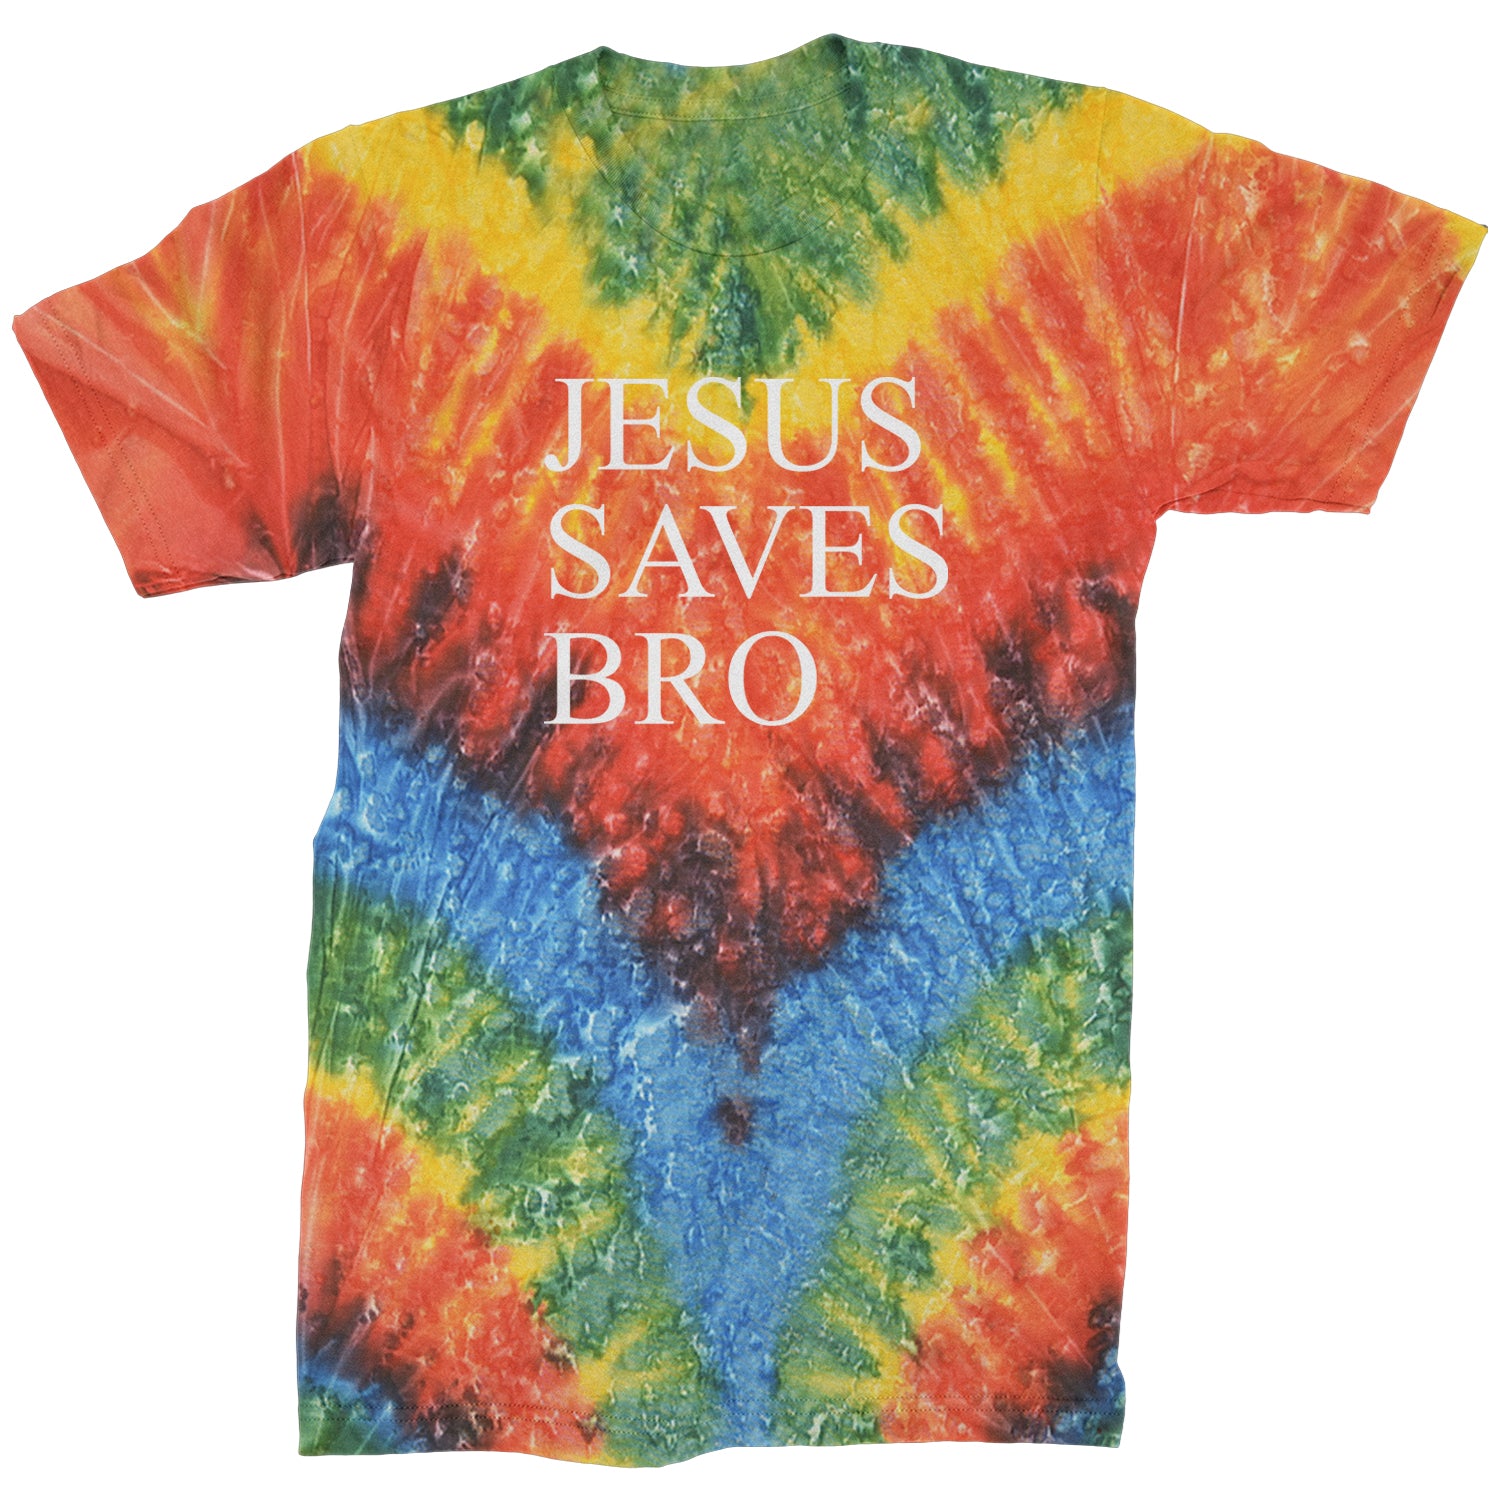 Jesus Saves Bro Mens T-shirt catholic, christian, christianity, church, jesus, religion, religuous by Expression Tees